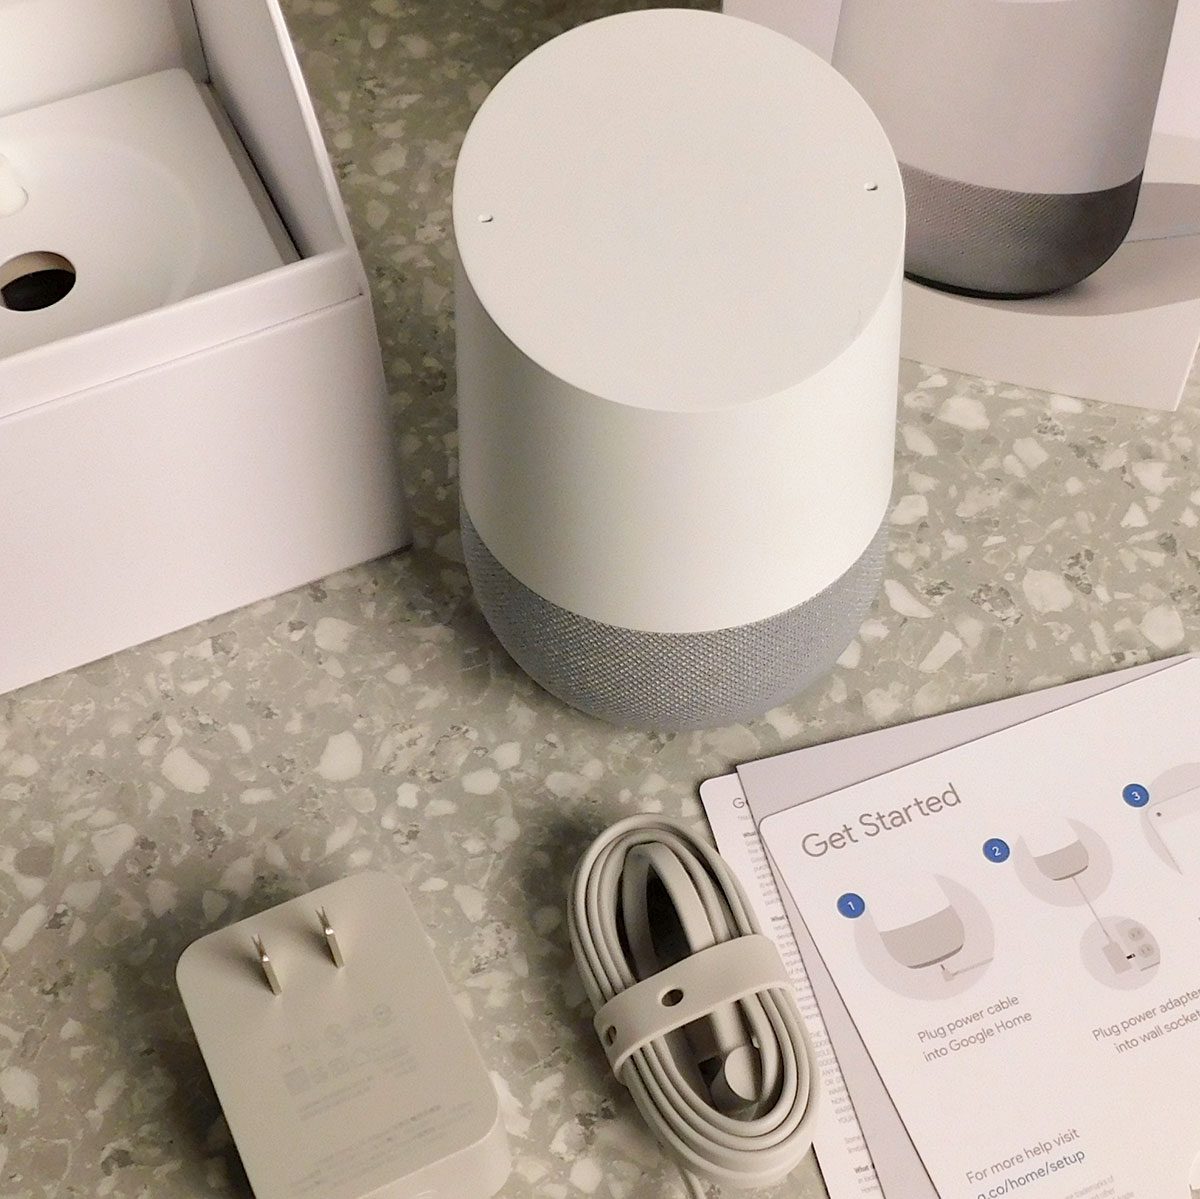 How To Connect Smart Plug To Google Home